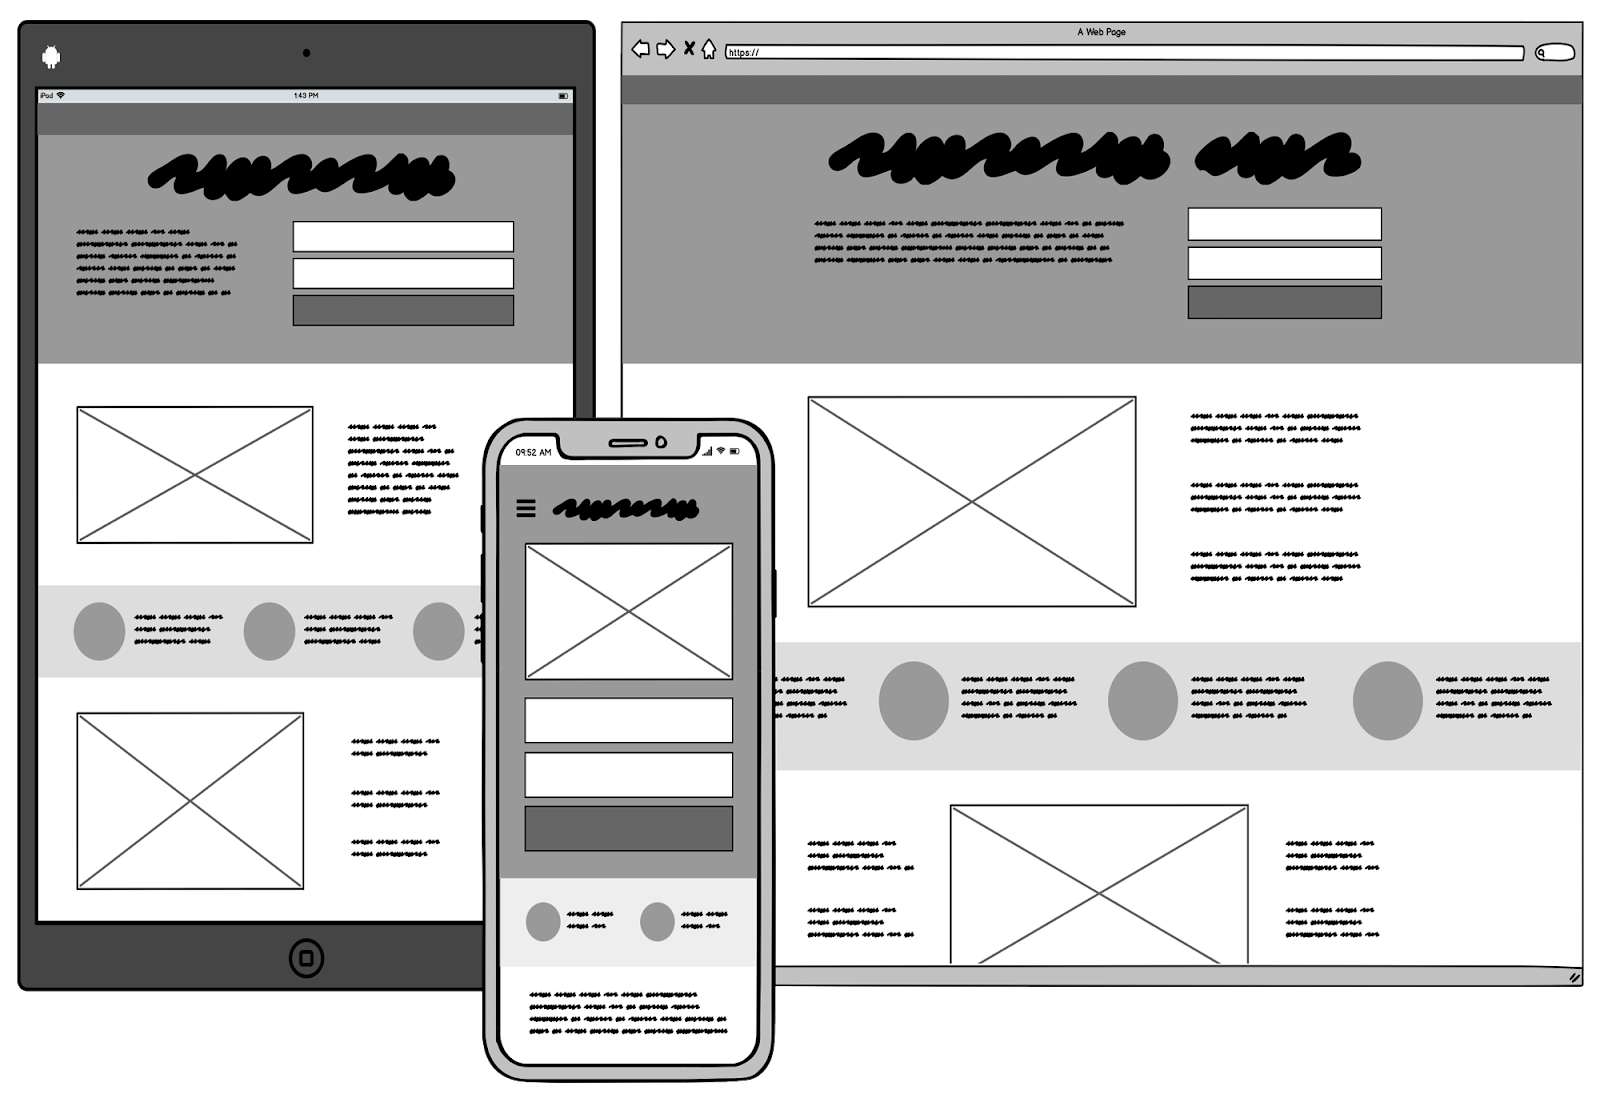 responsive web design layout for desktop, tablet, and smartphone. It illustrates a mobile-first design approach, optimizing the website for mobile devices first